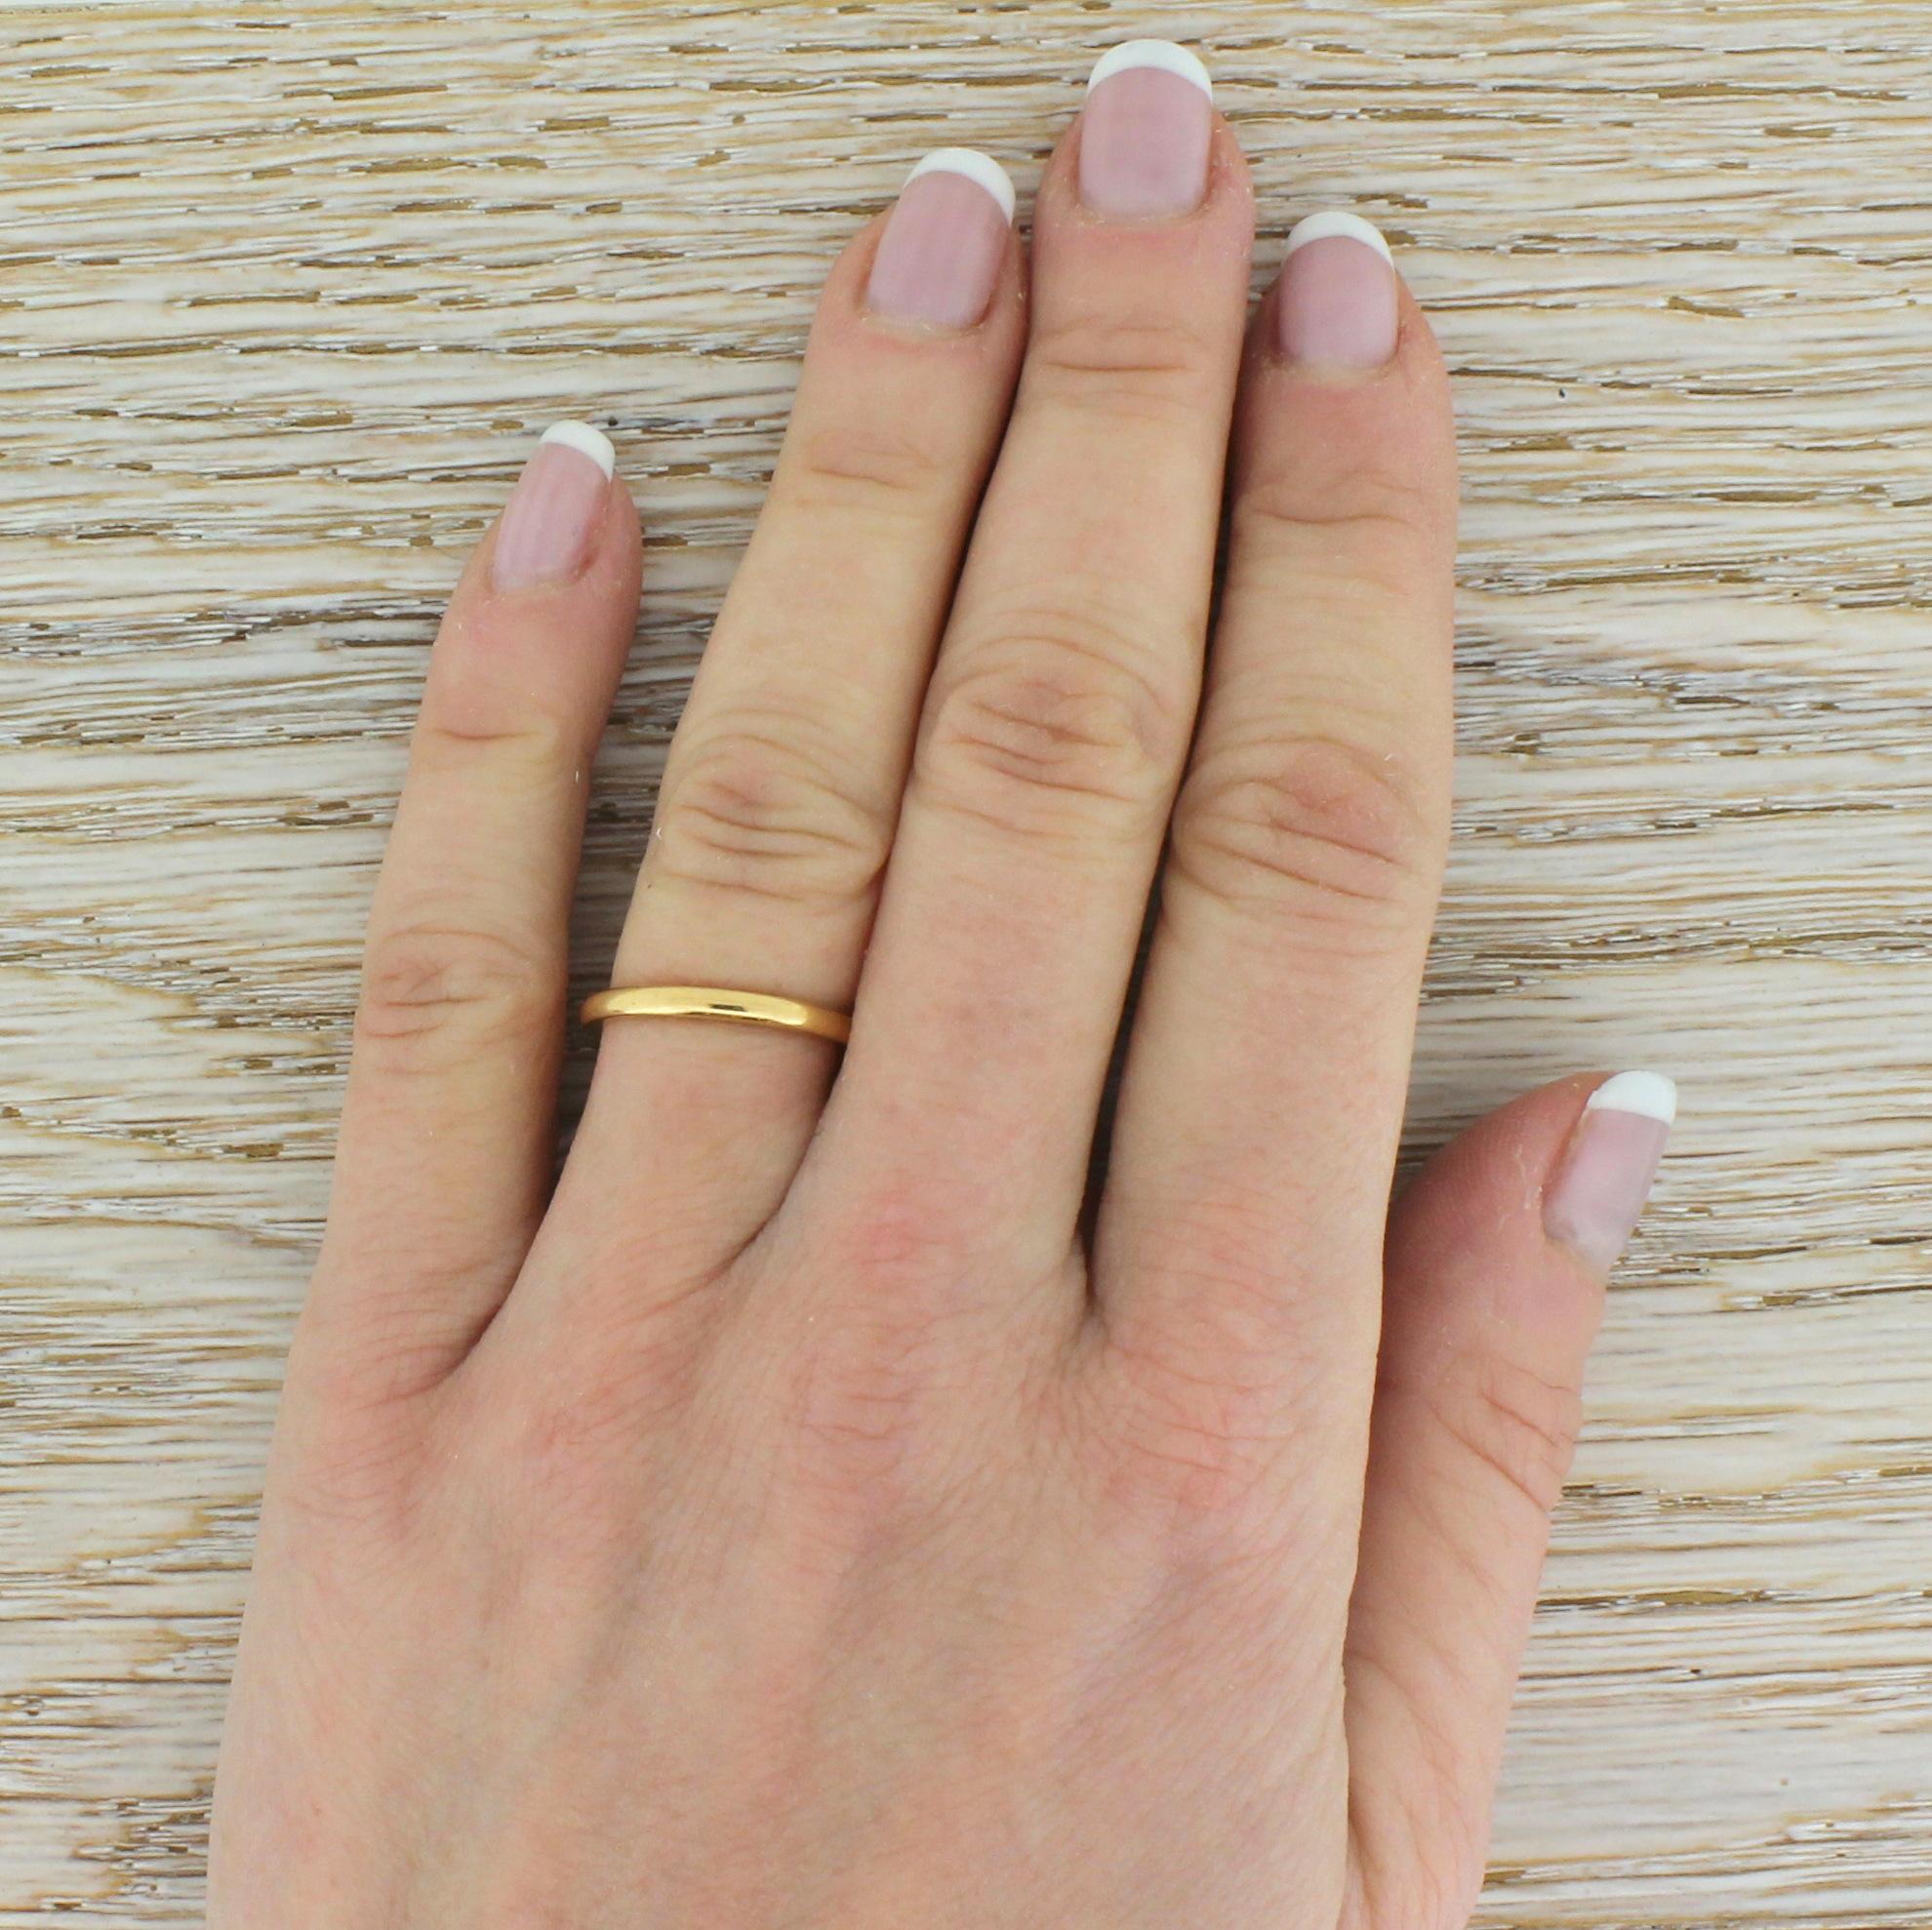 An exceptional and wearable antique wedding band ring. This slim, court shaped band is crafted in a warm hued 22k yellow gold. With clear internal hallmarks indicating the Birmingham Assay, 1939.

Size – L (UK) or 5 7/8 (US). Complimentary sizing is